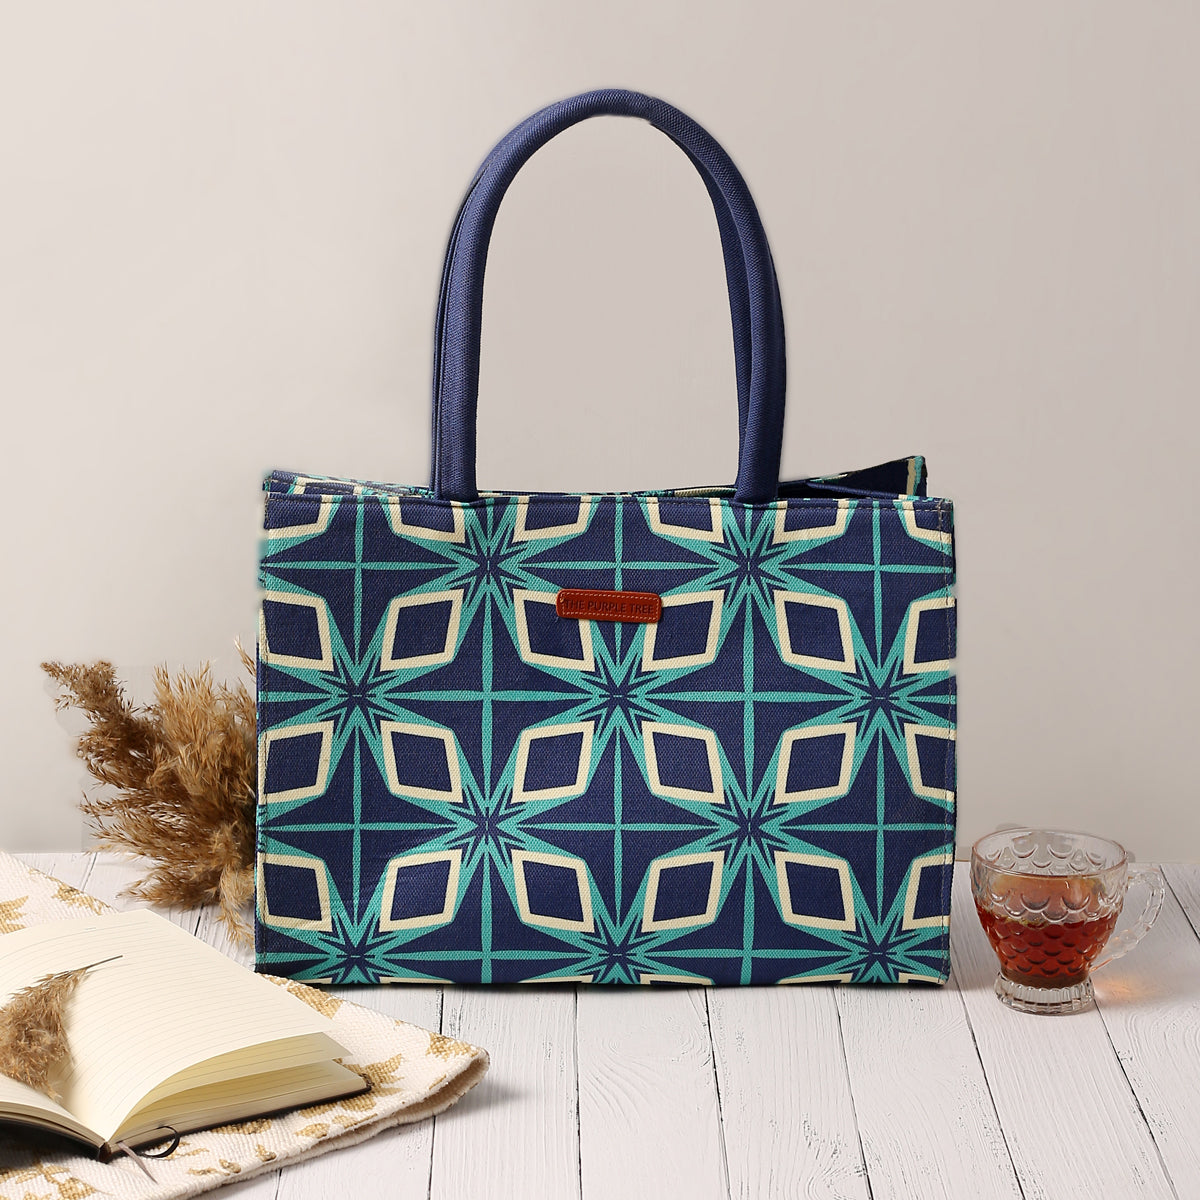 Blue and green patterned tote bag with book and sunglasses.